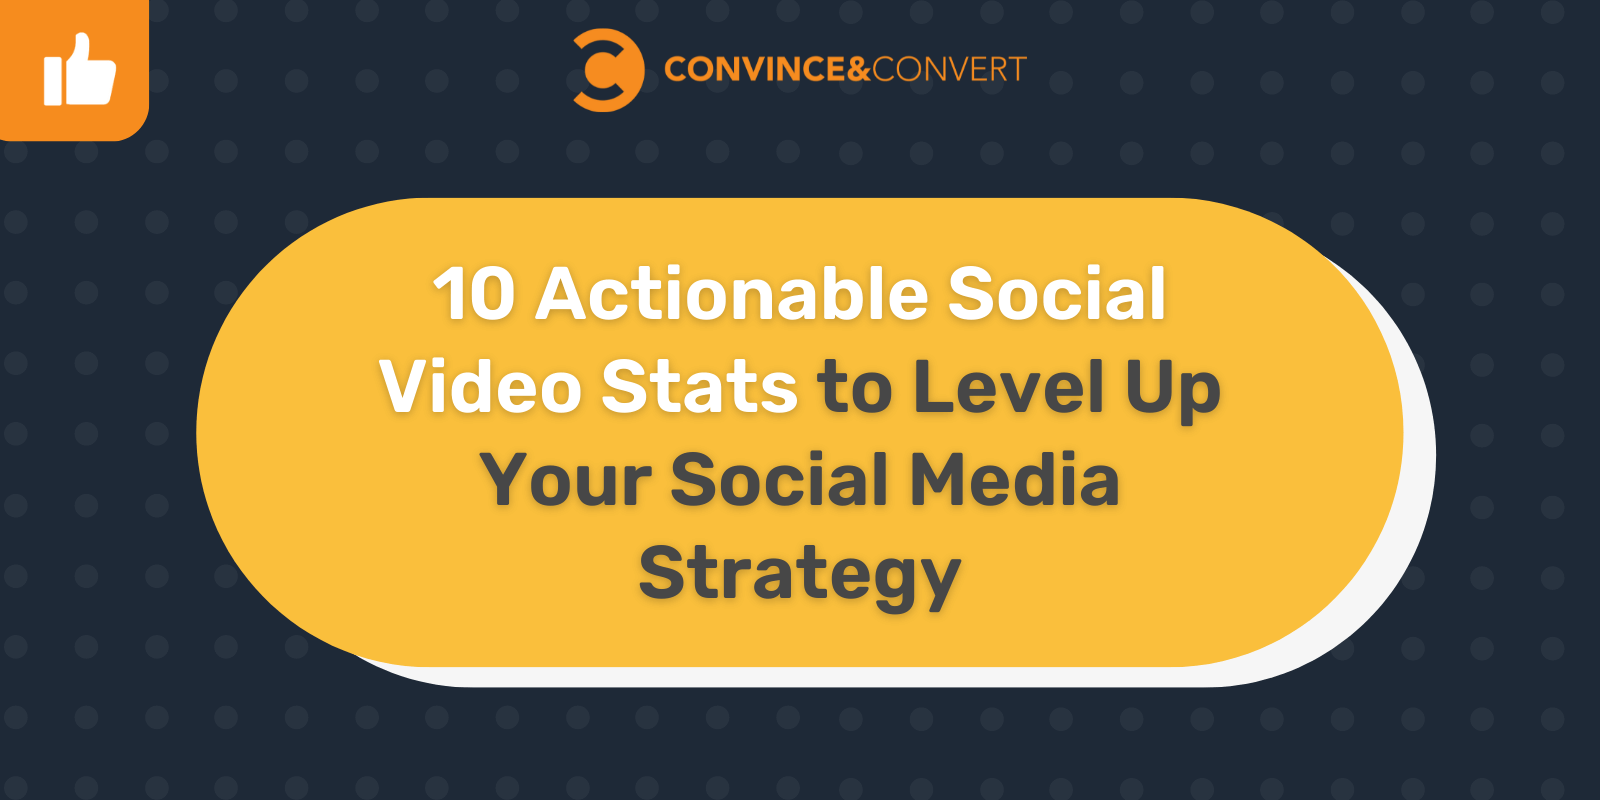 10 Actionable Social Video Stats To Level Up Your Social Media Strategy